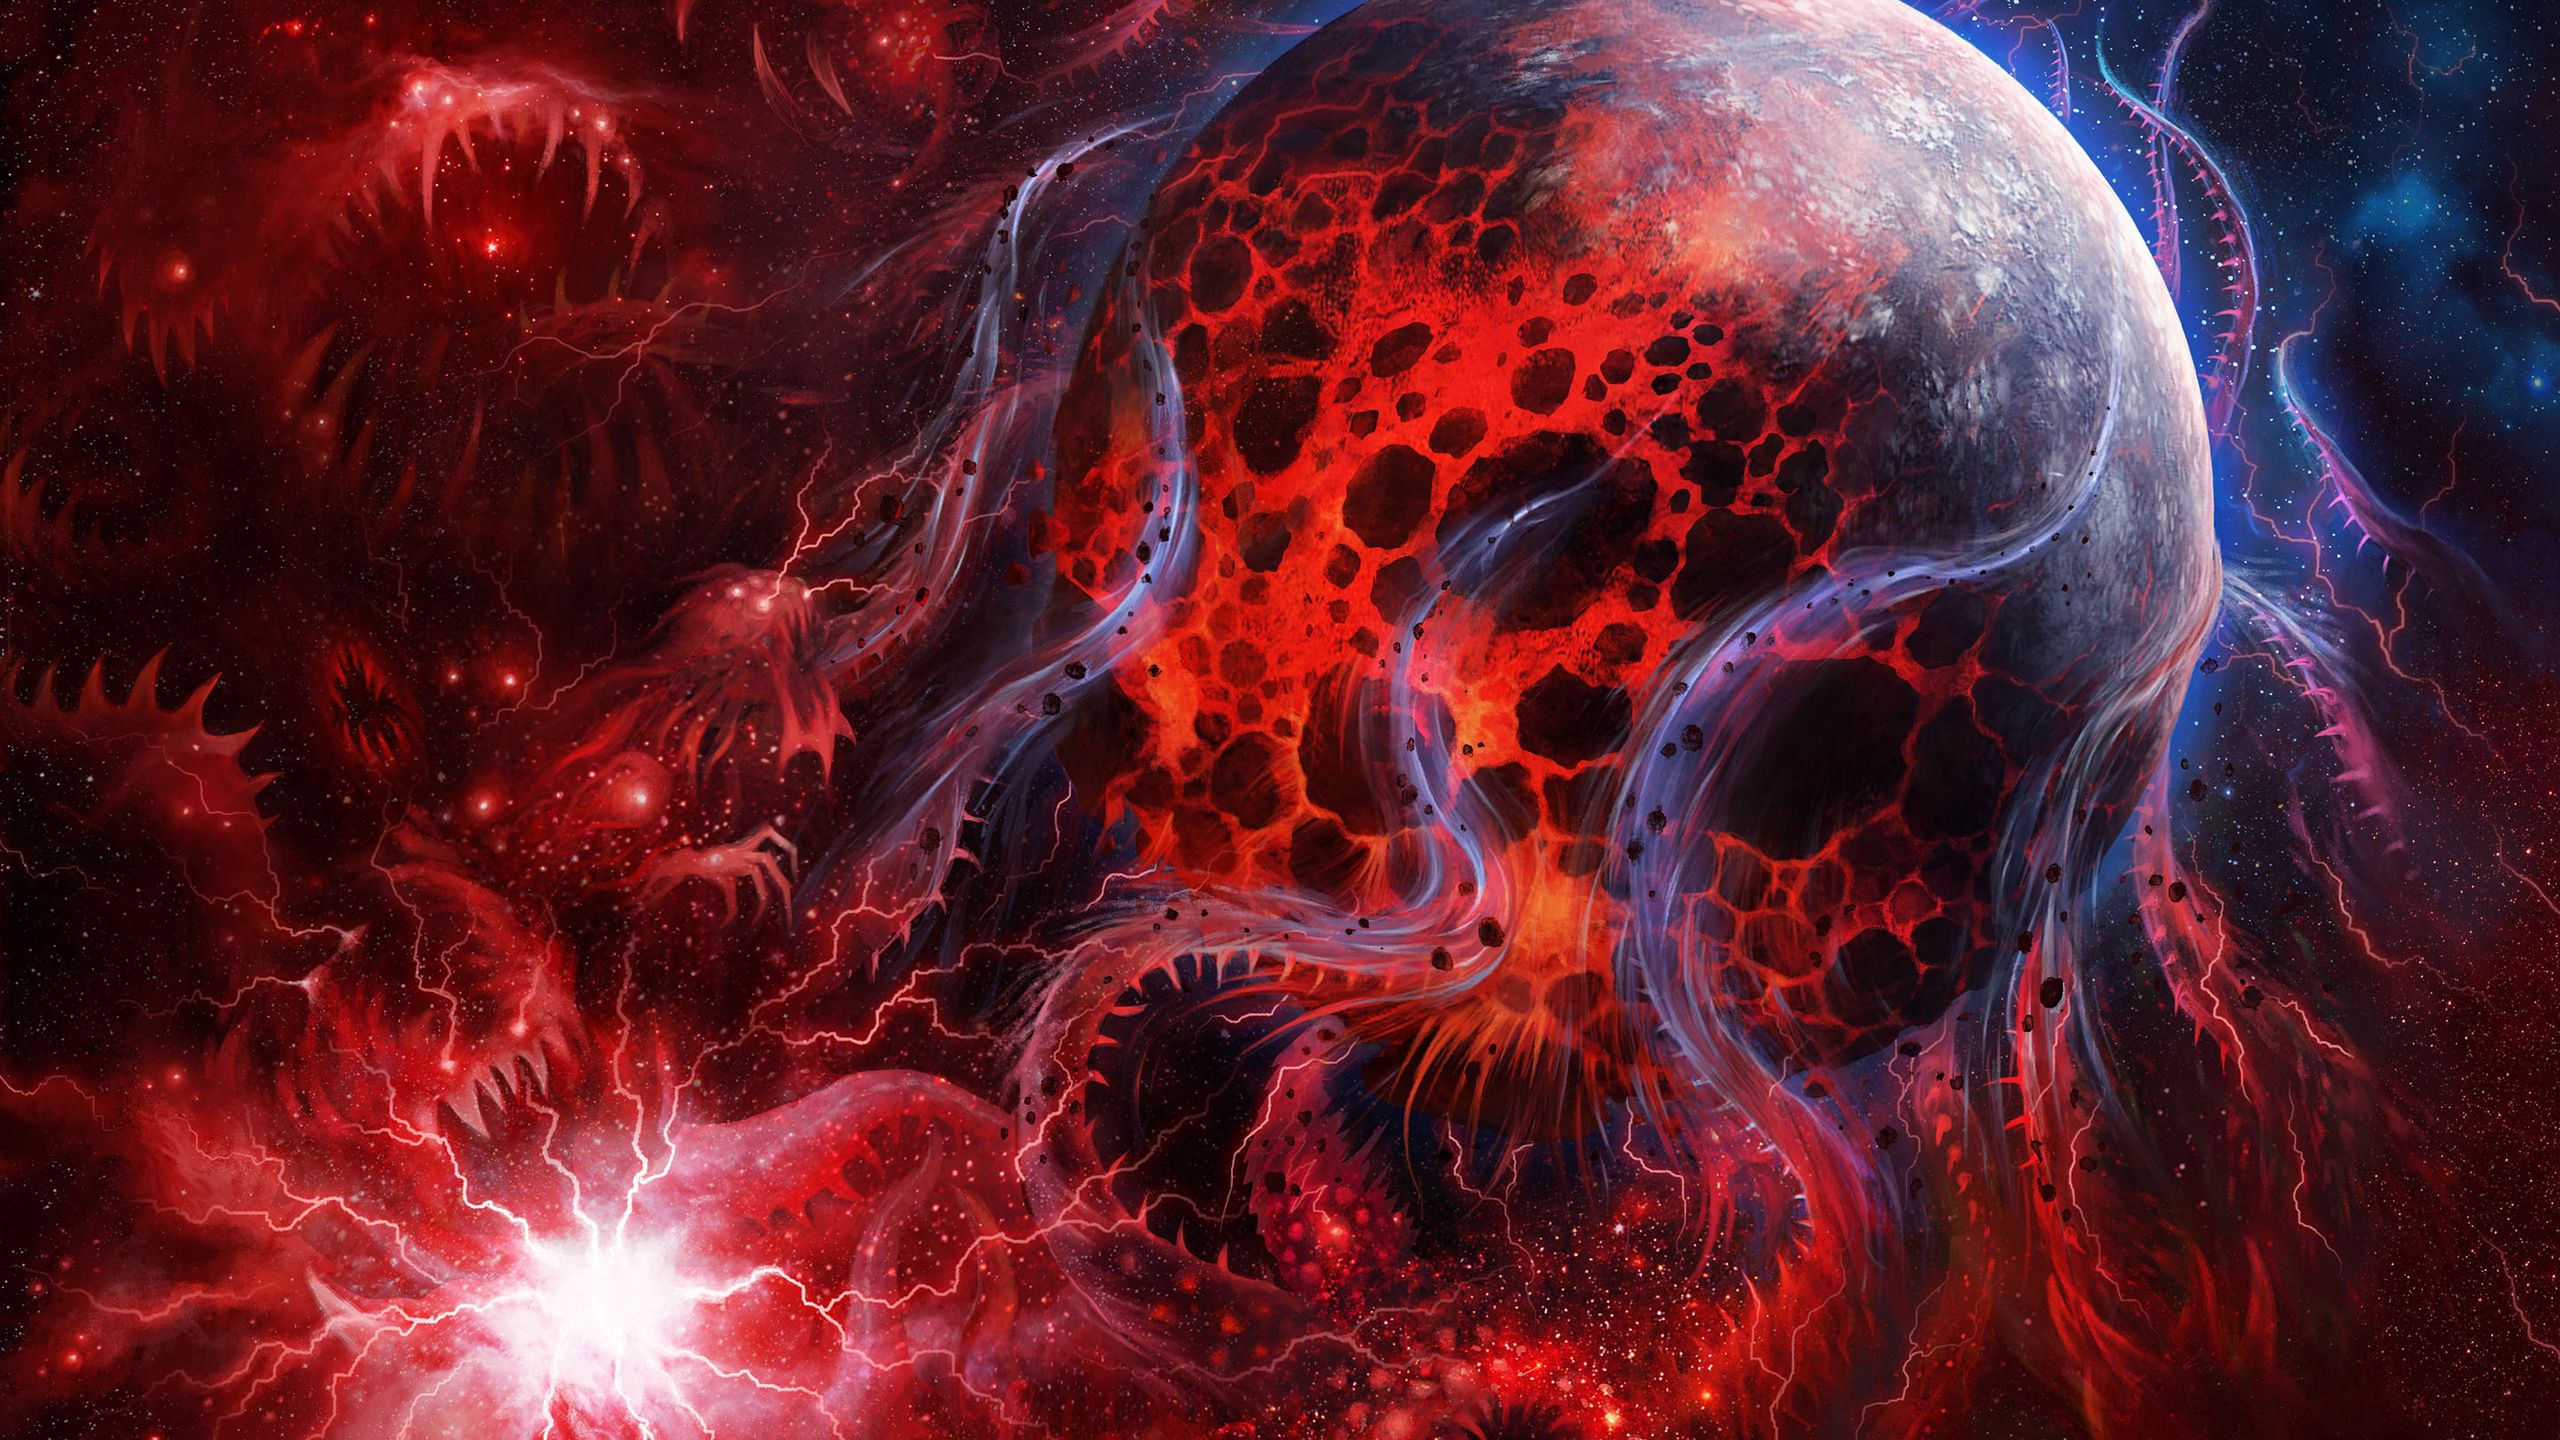 General 2560x1440 space space art aliens H. P. Lovecraft red